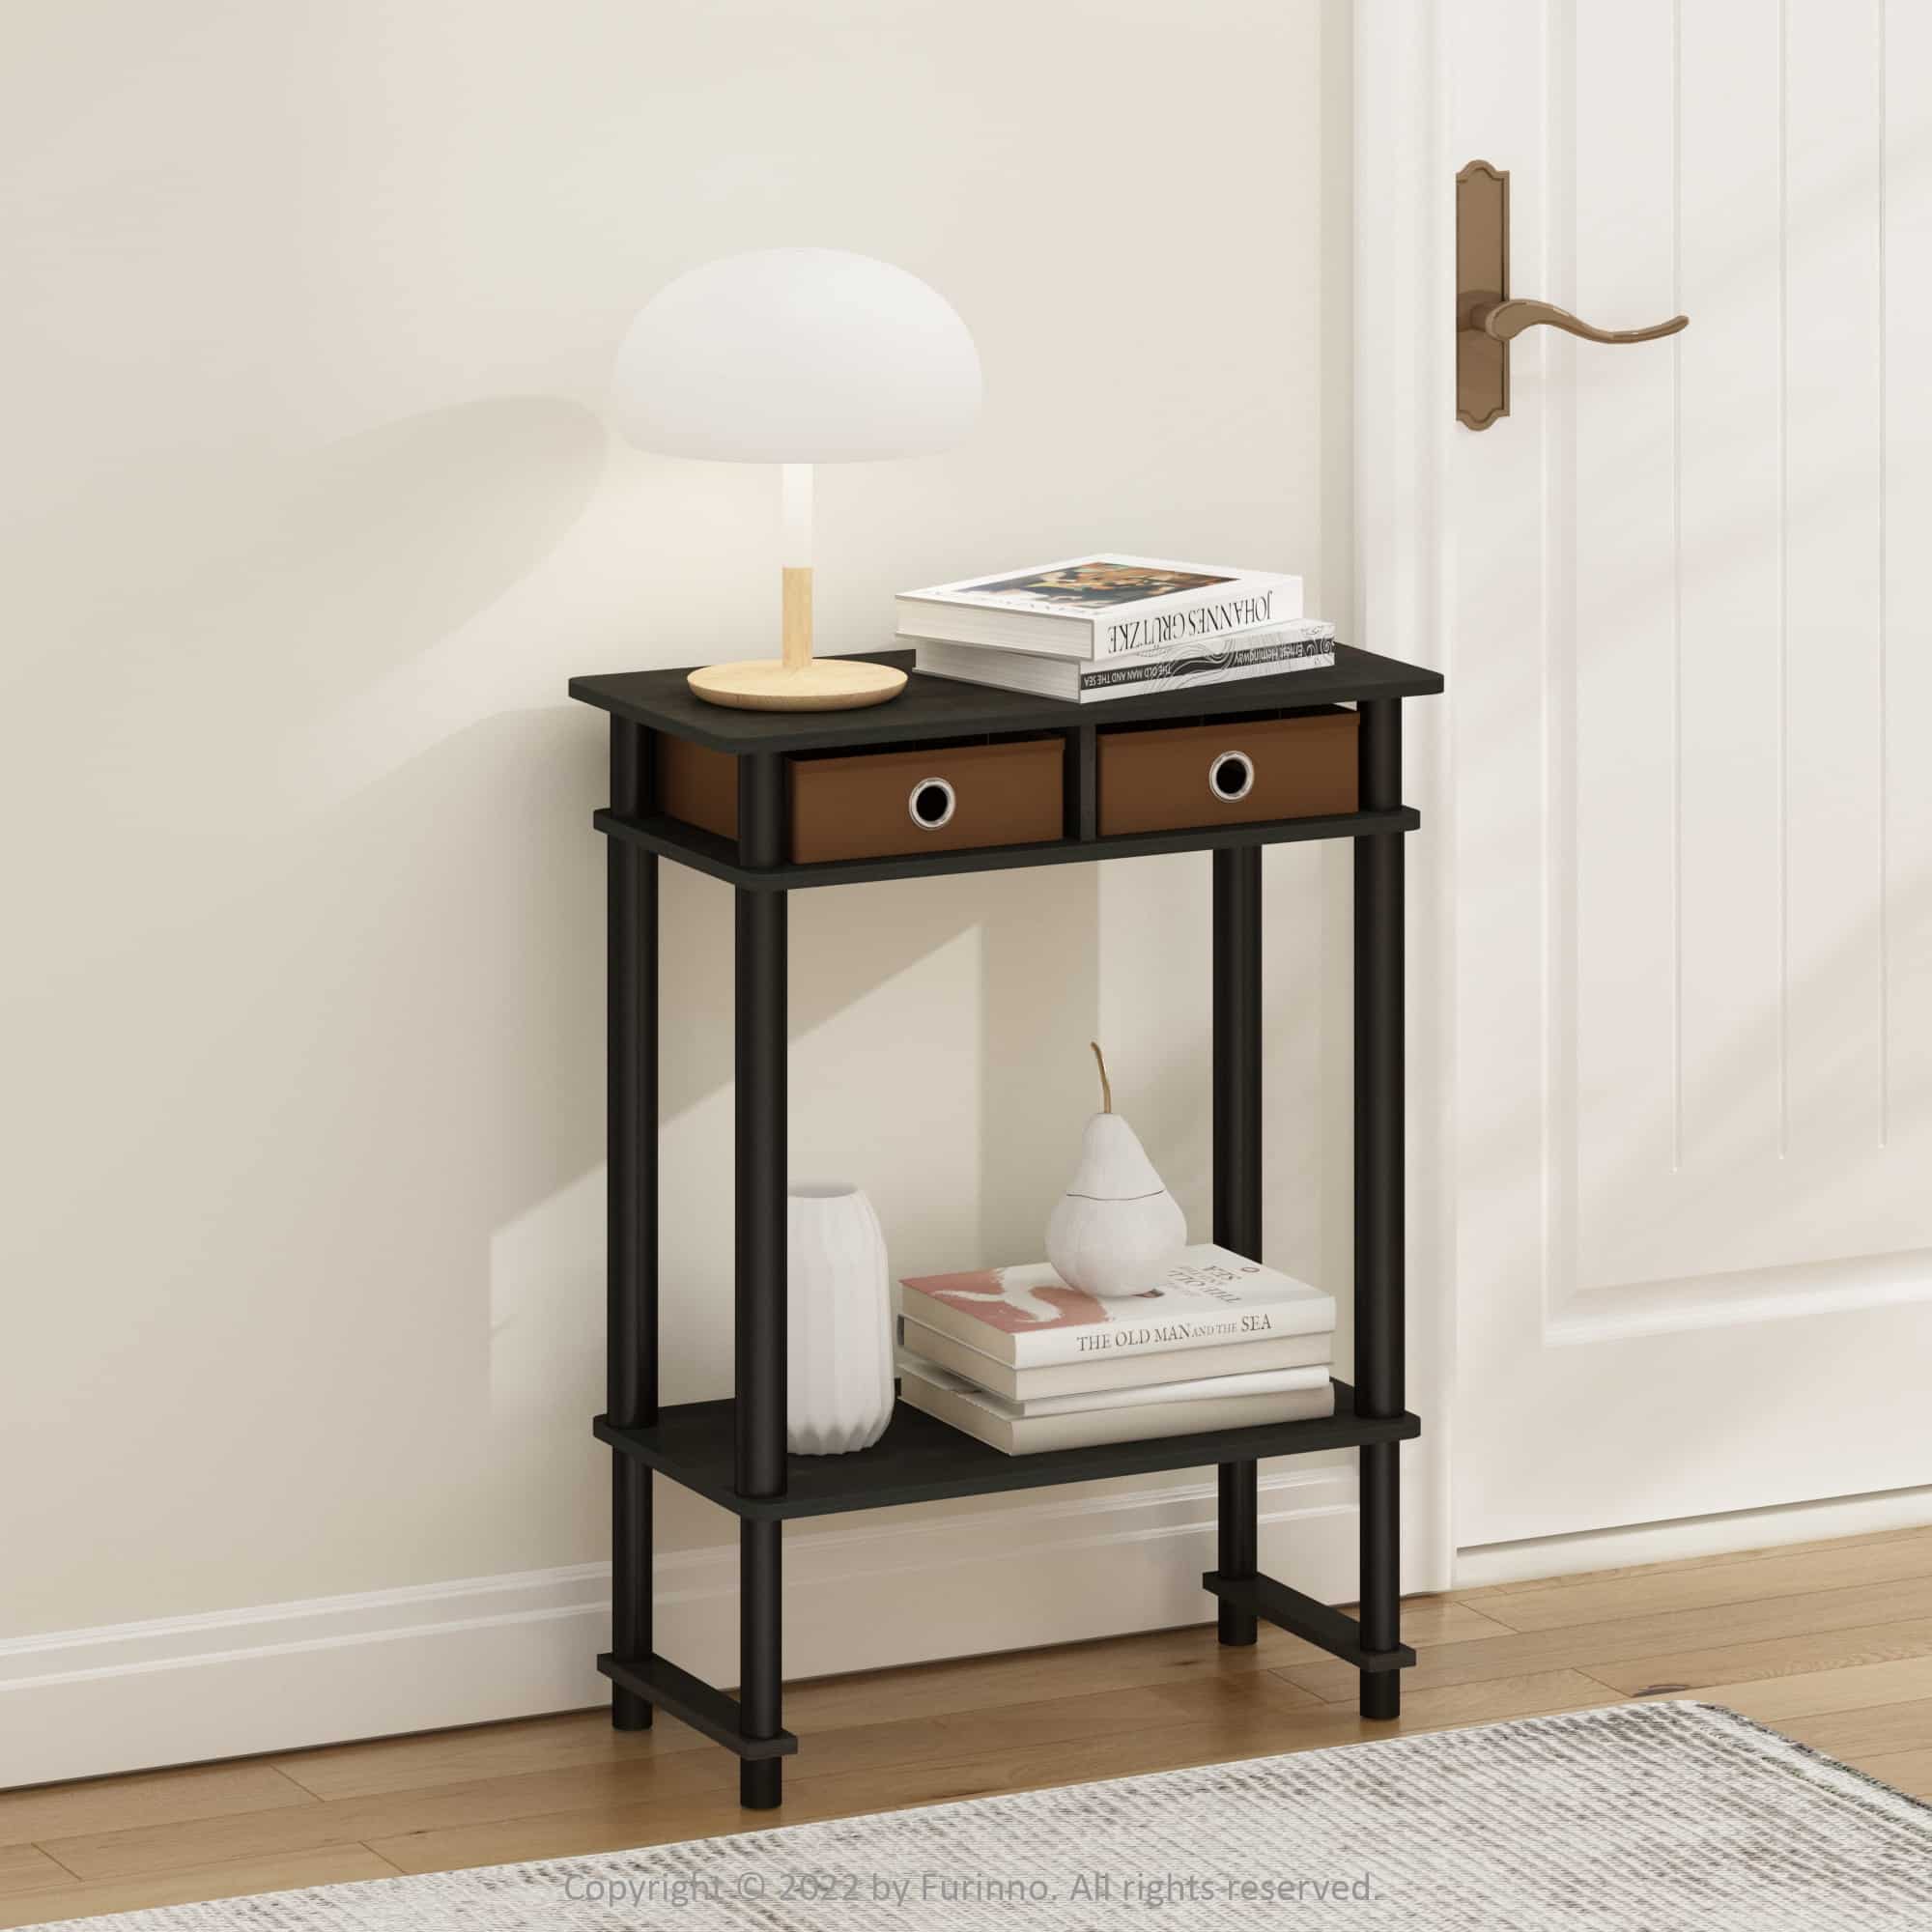 Furinno Turn-N-Tube Tall-Wide Hallway Console Table with Bin